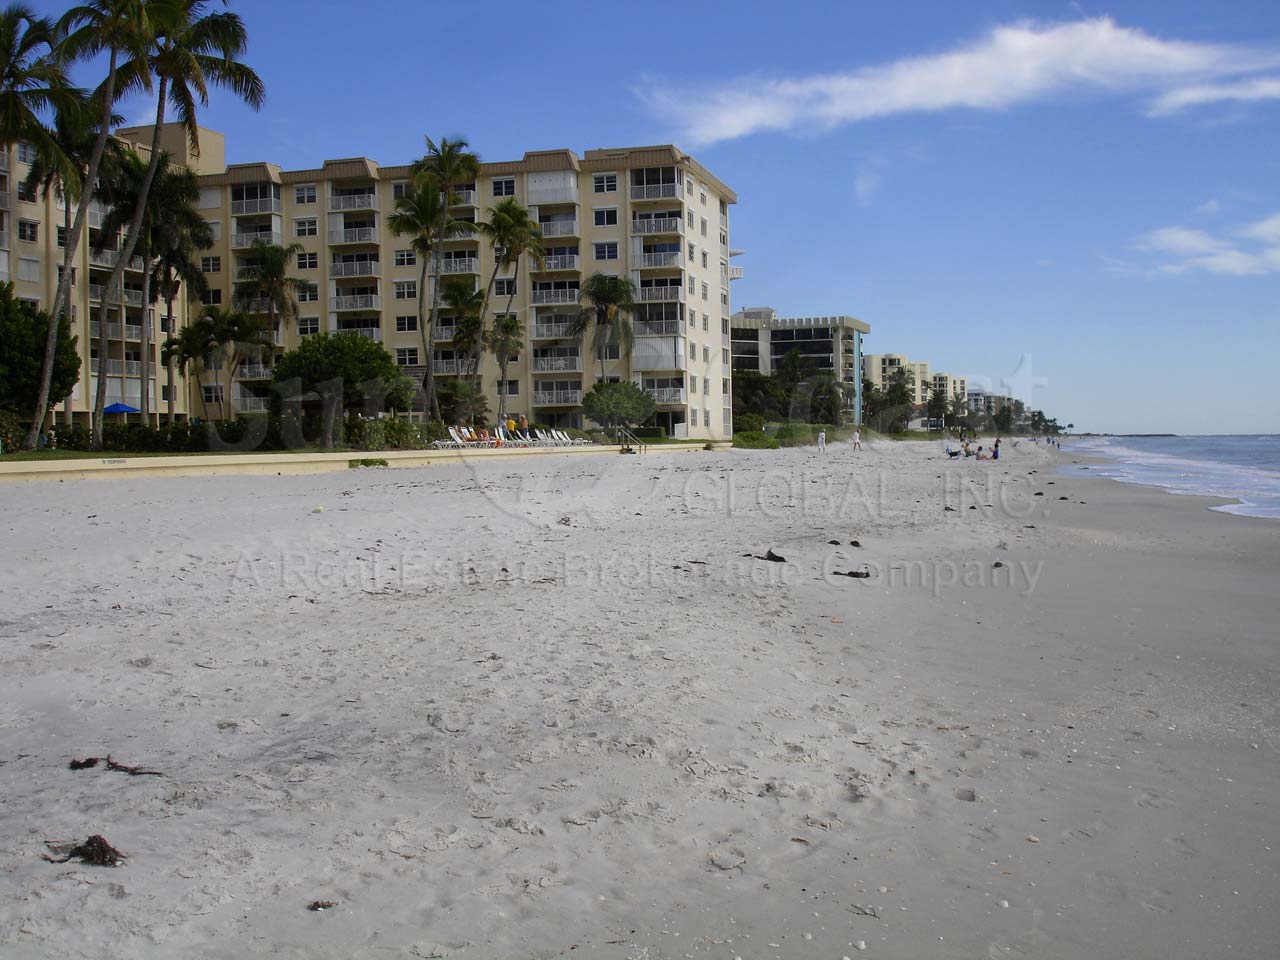 Naples Continental View of Beach